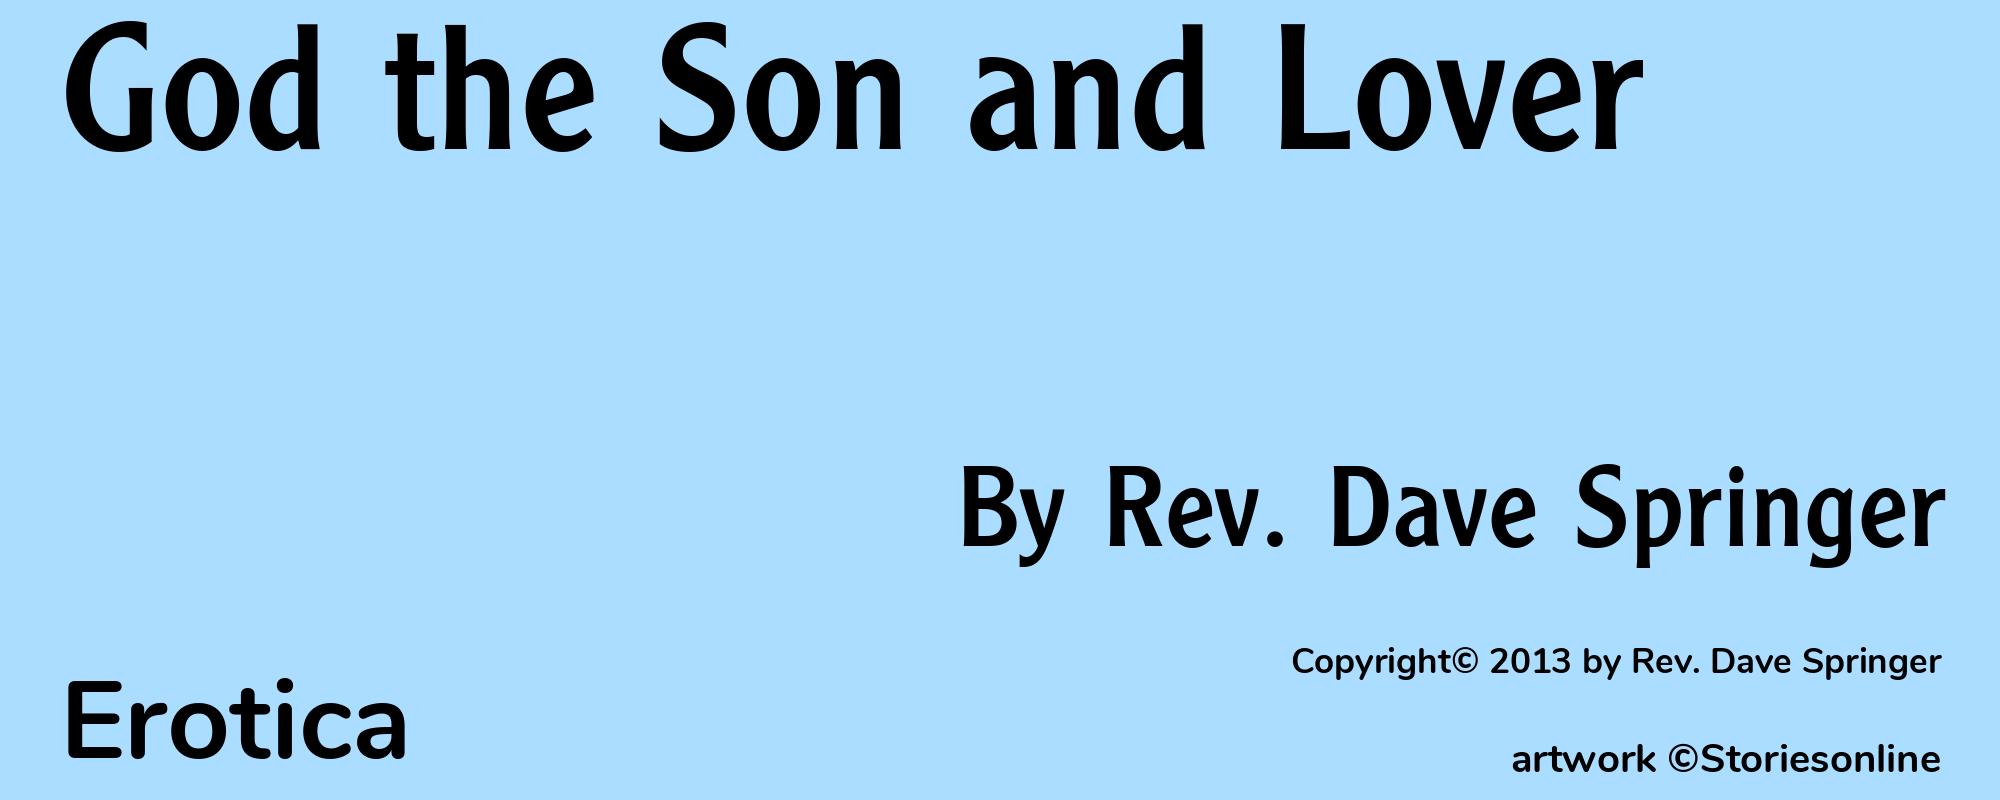 God the Son and Lover - Cover